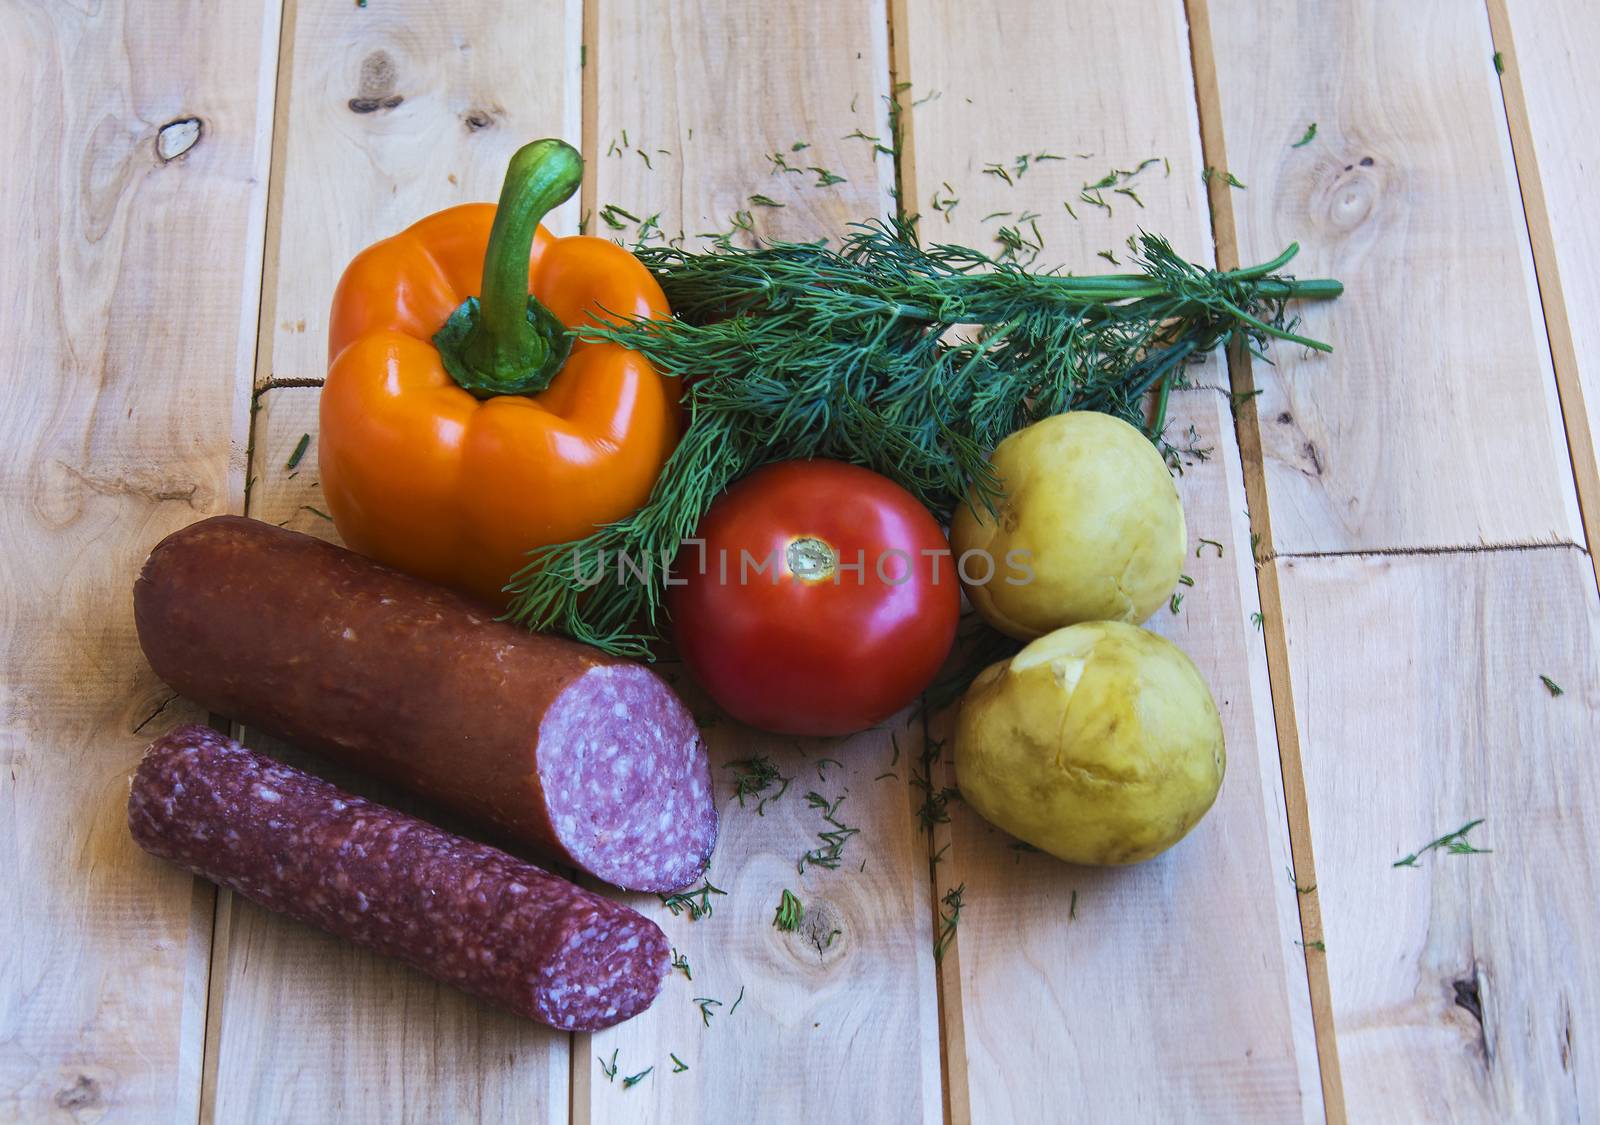 Sausage with vegetables and herbs by Grommik